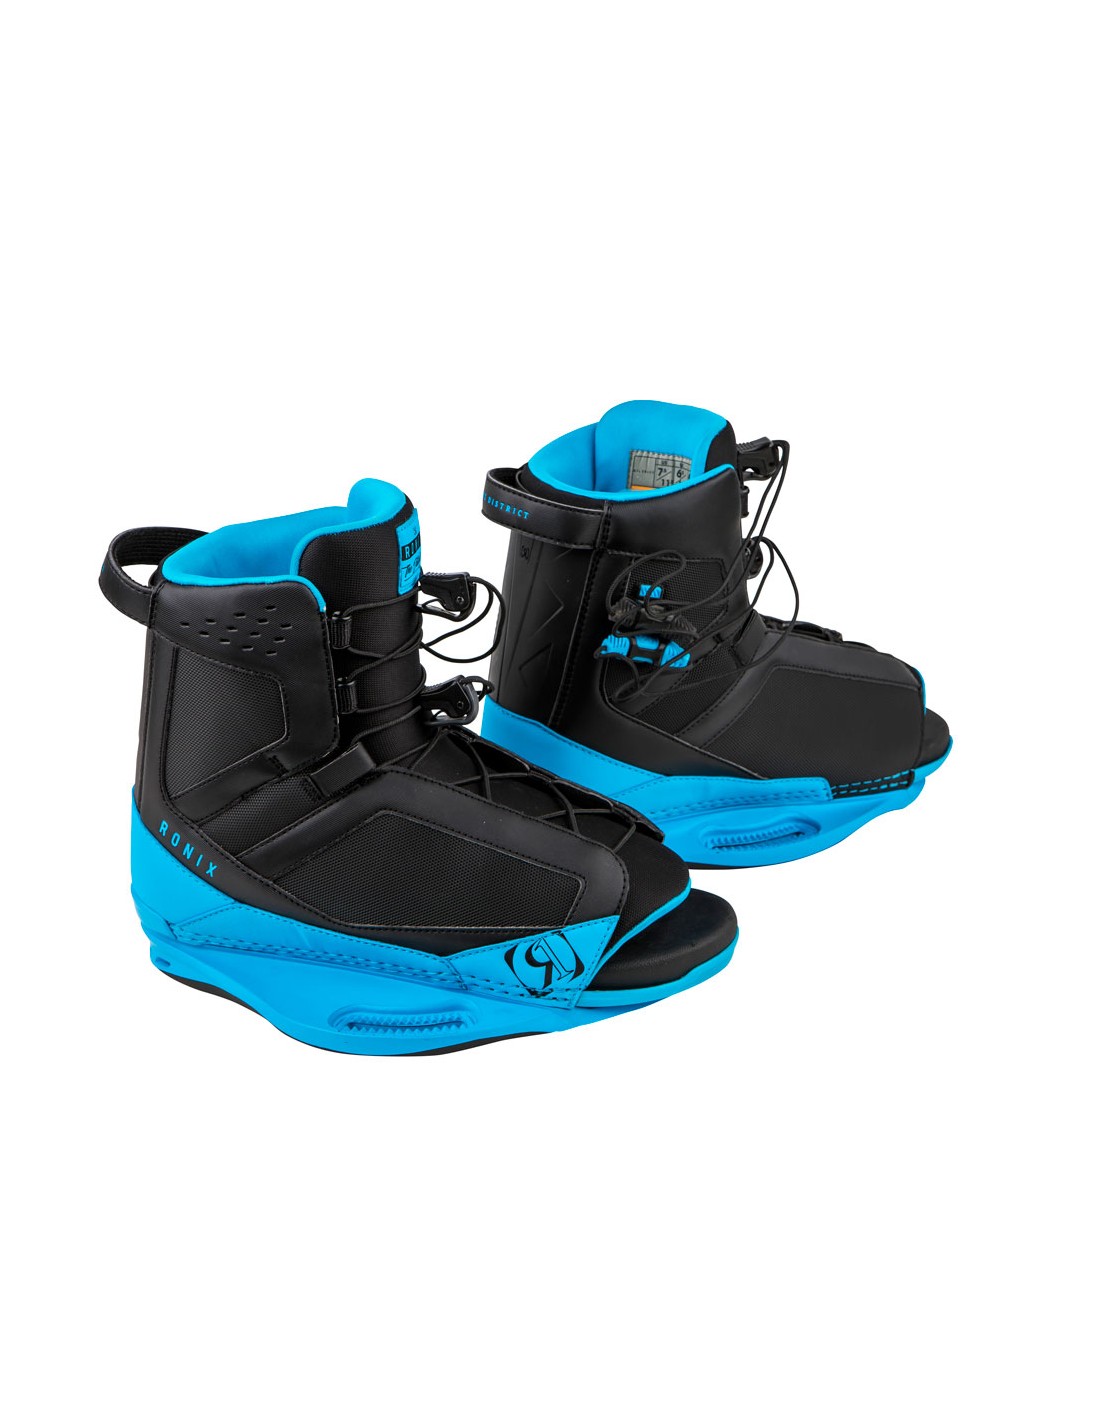 Black//Azure Blue Ronix 2018 District Wakeboard Boots